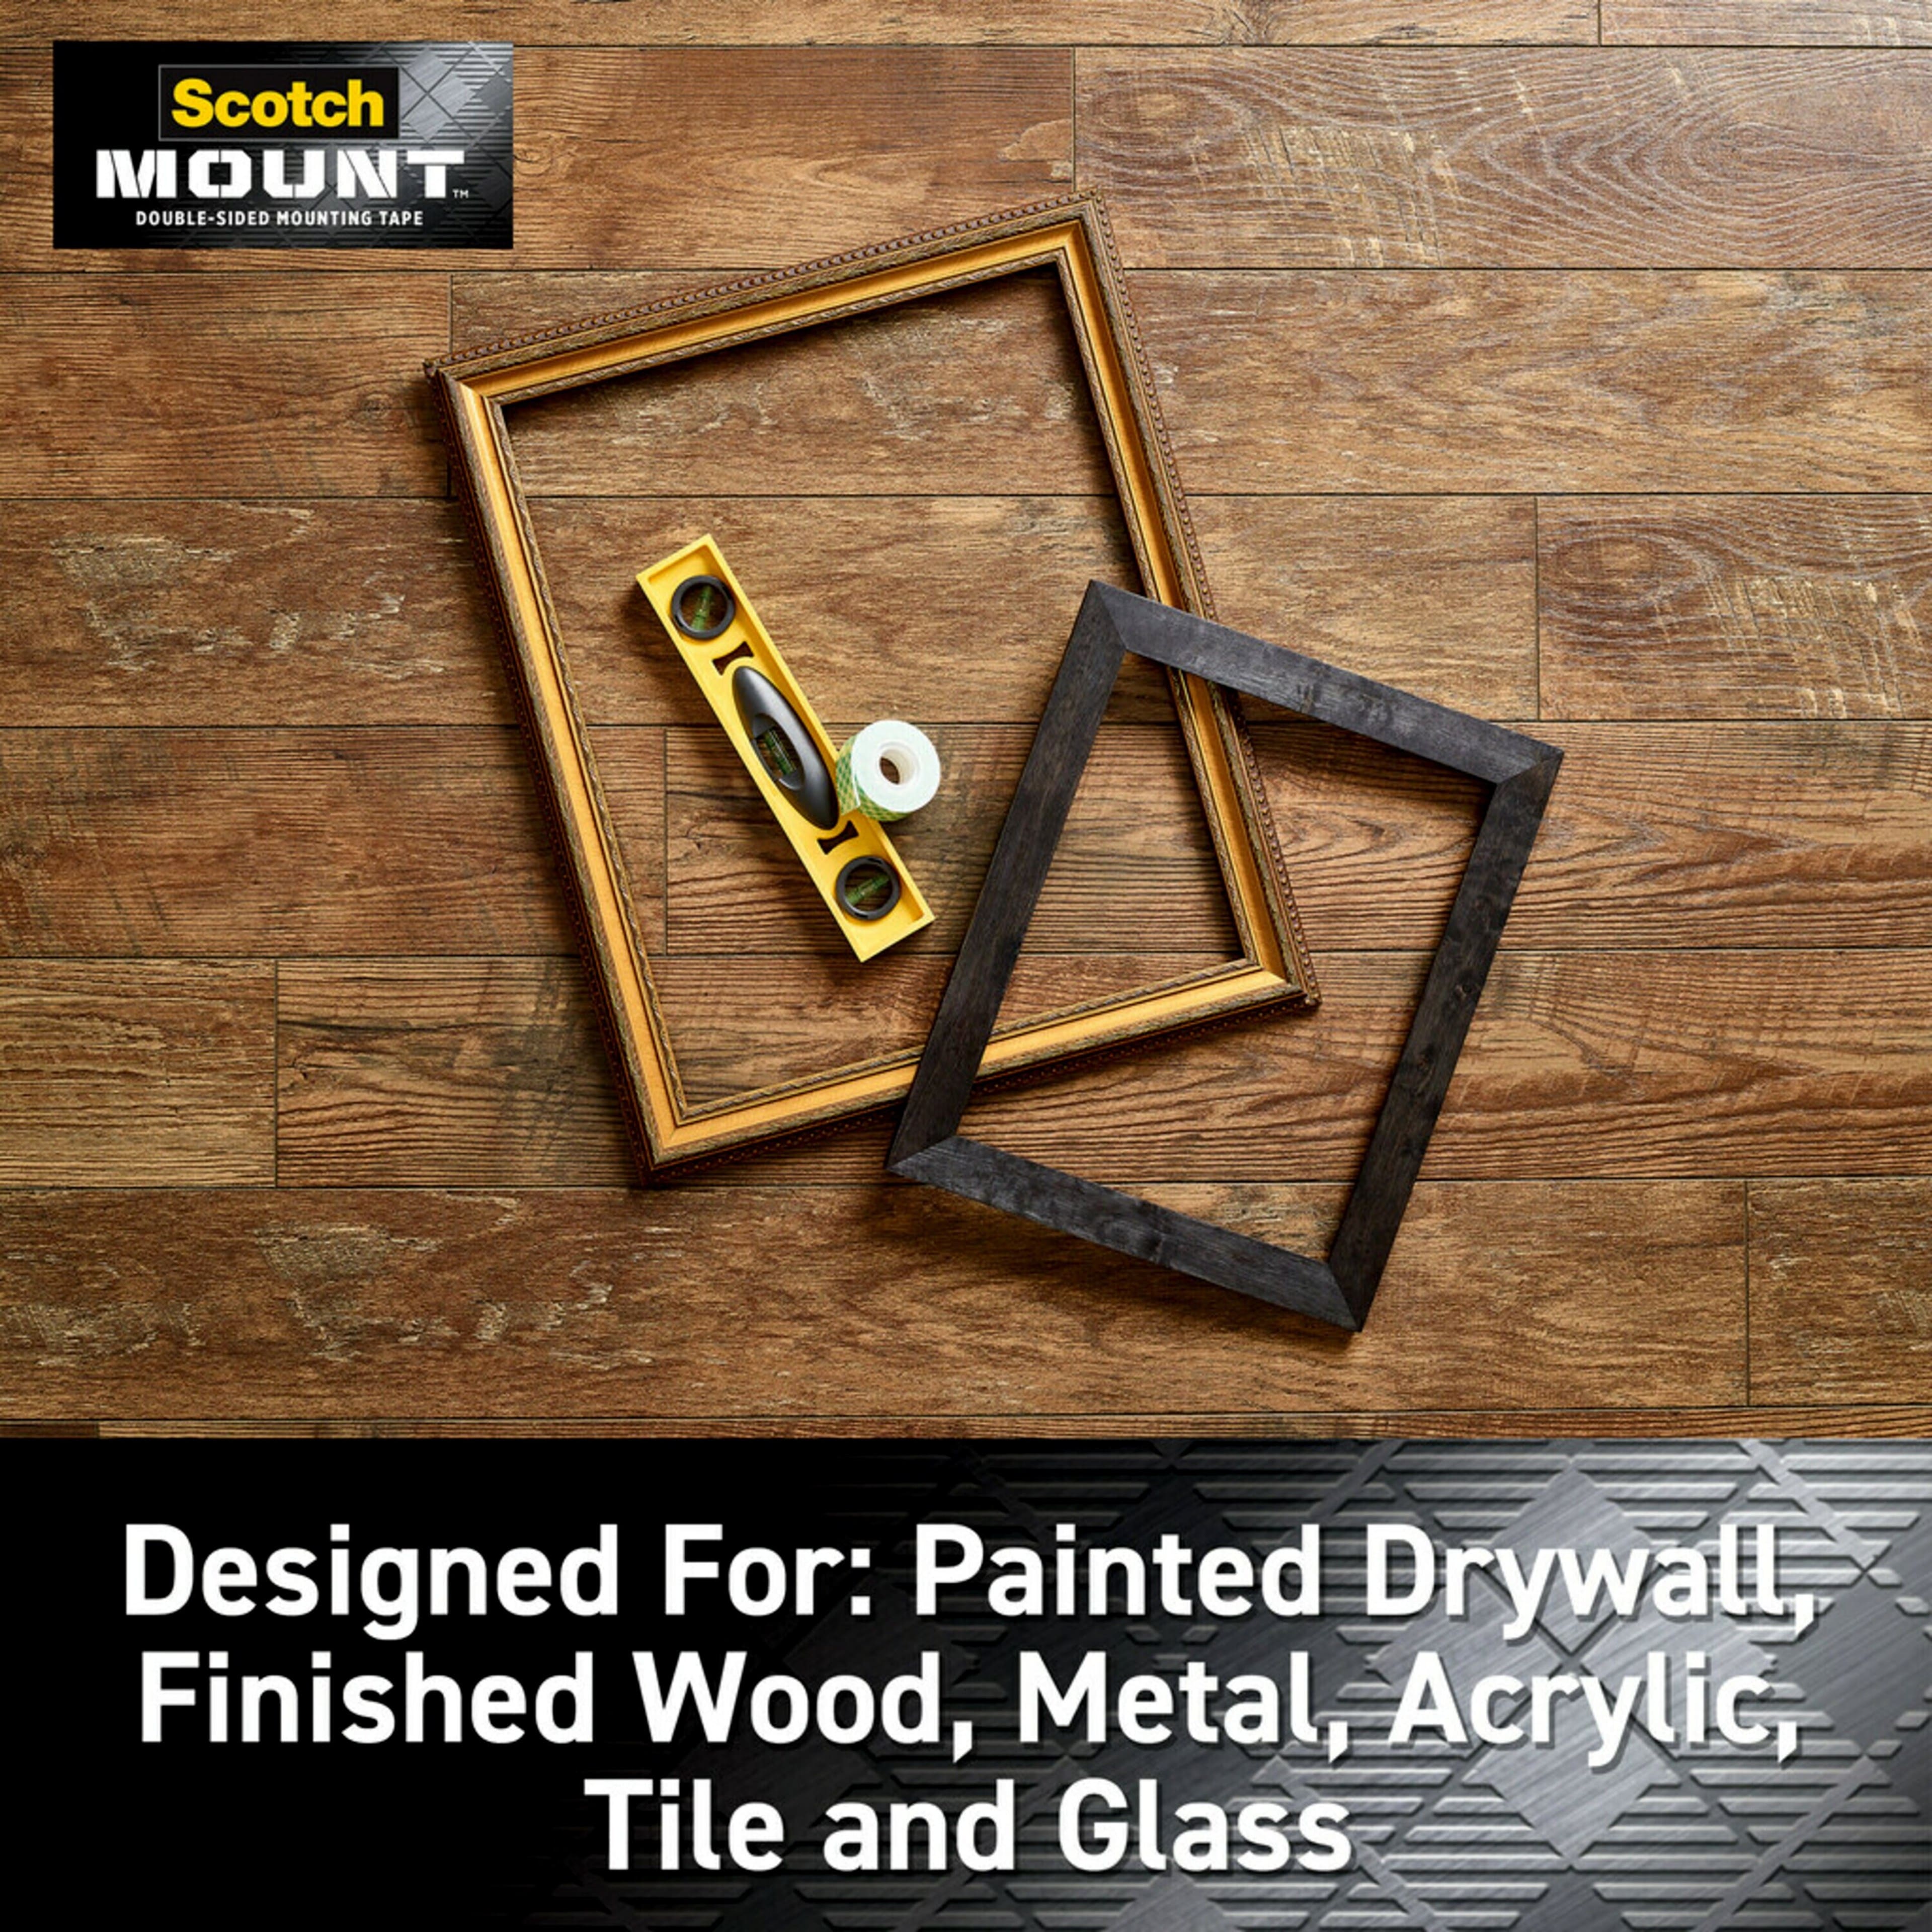 Shop for the 3M Scotch® Permanent Mounting Tape at Michaels